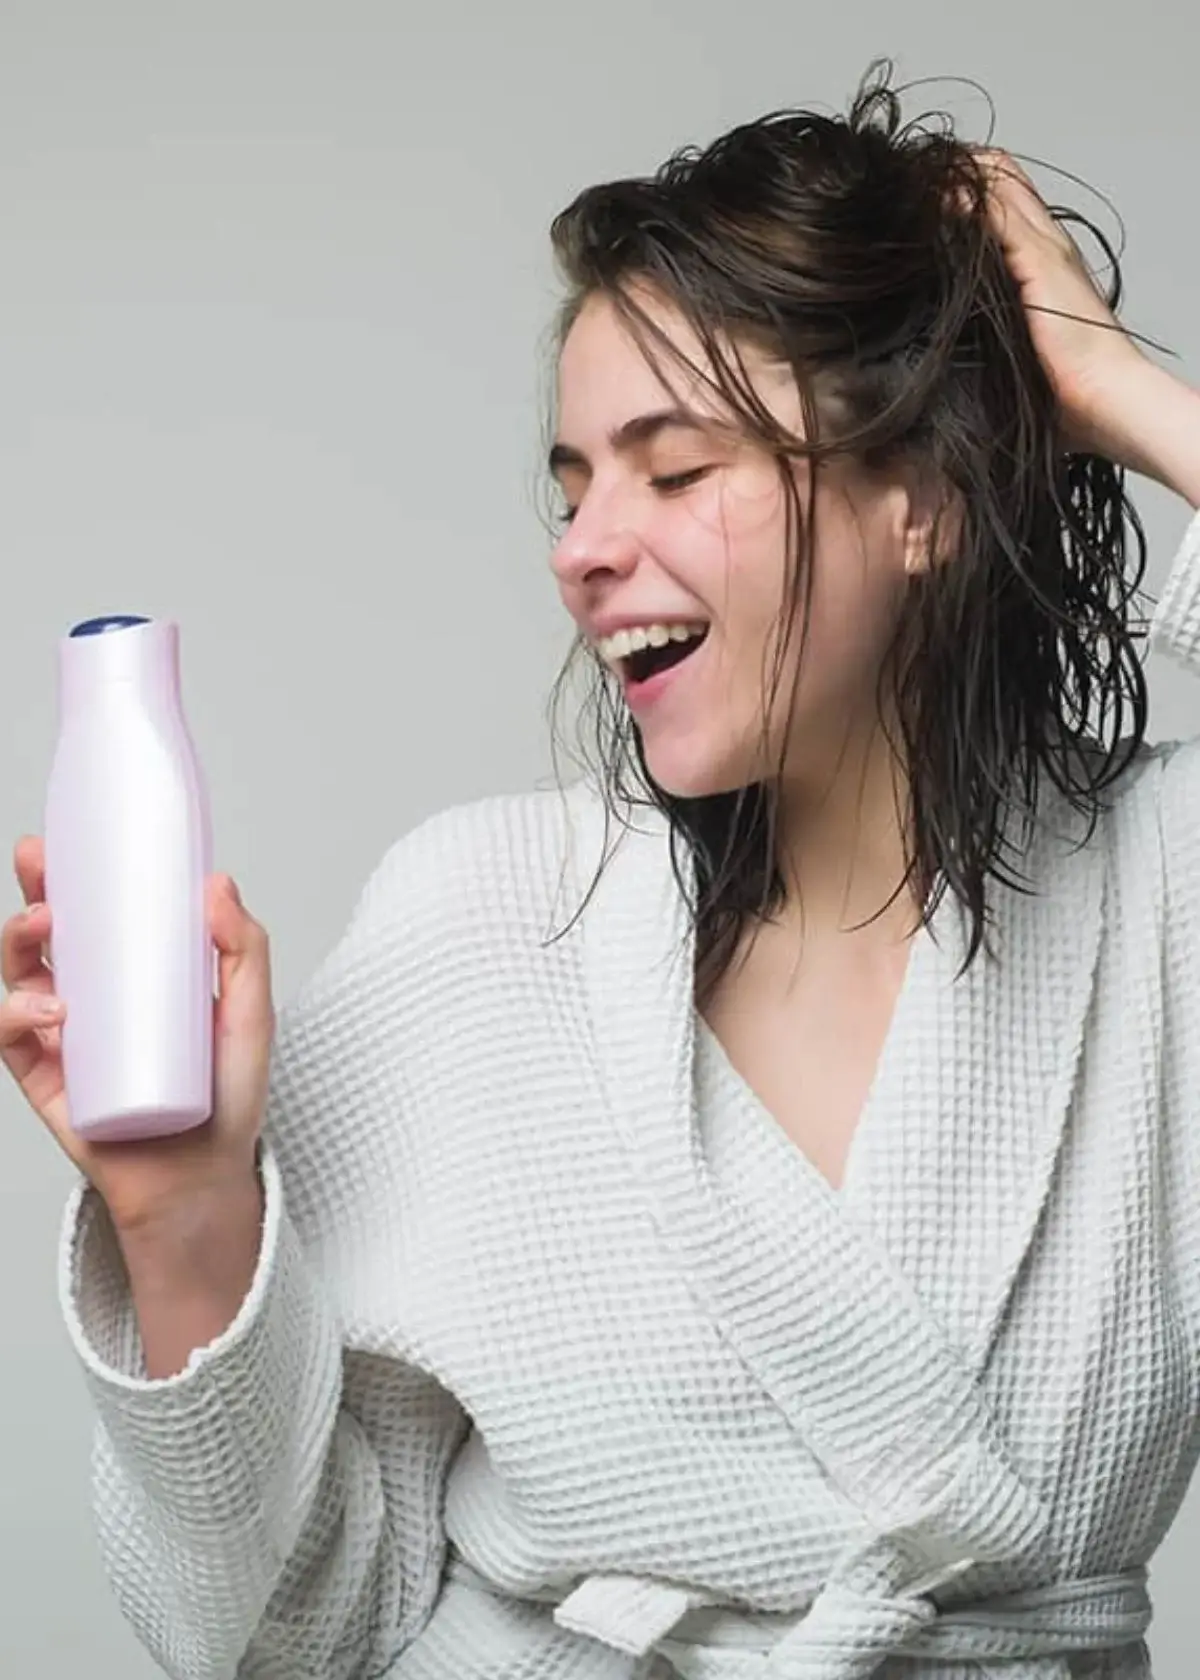 How to choose the right dry shampoo?